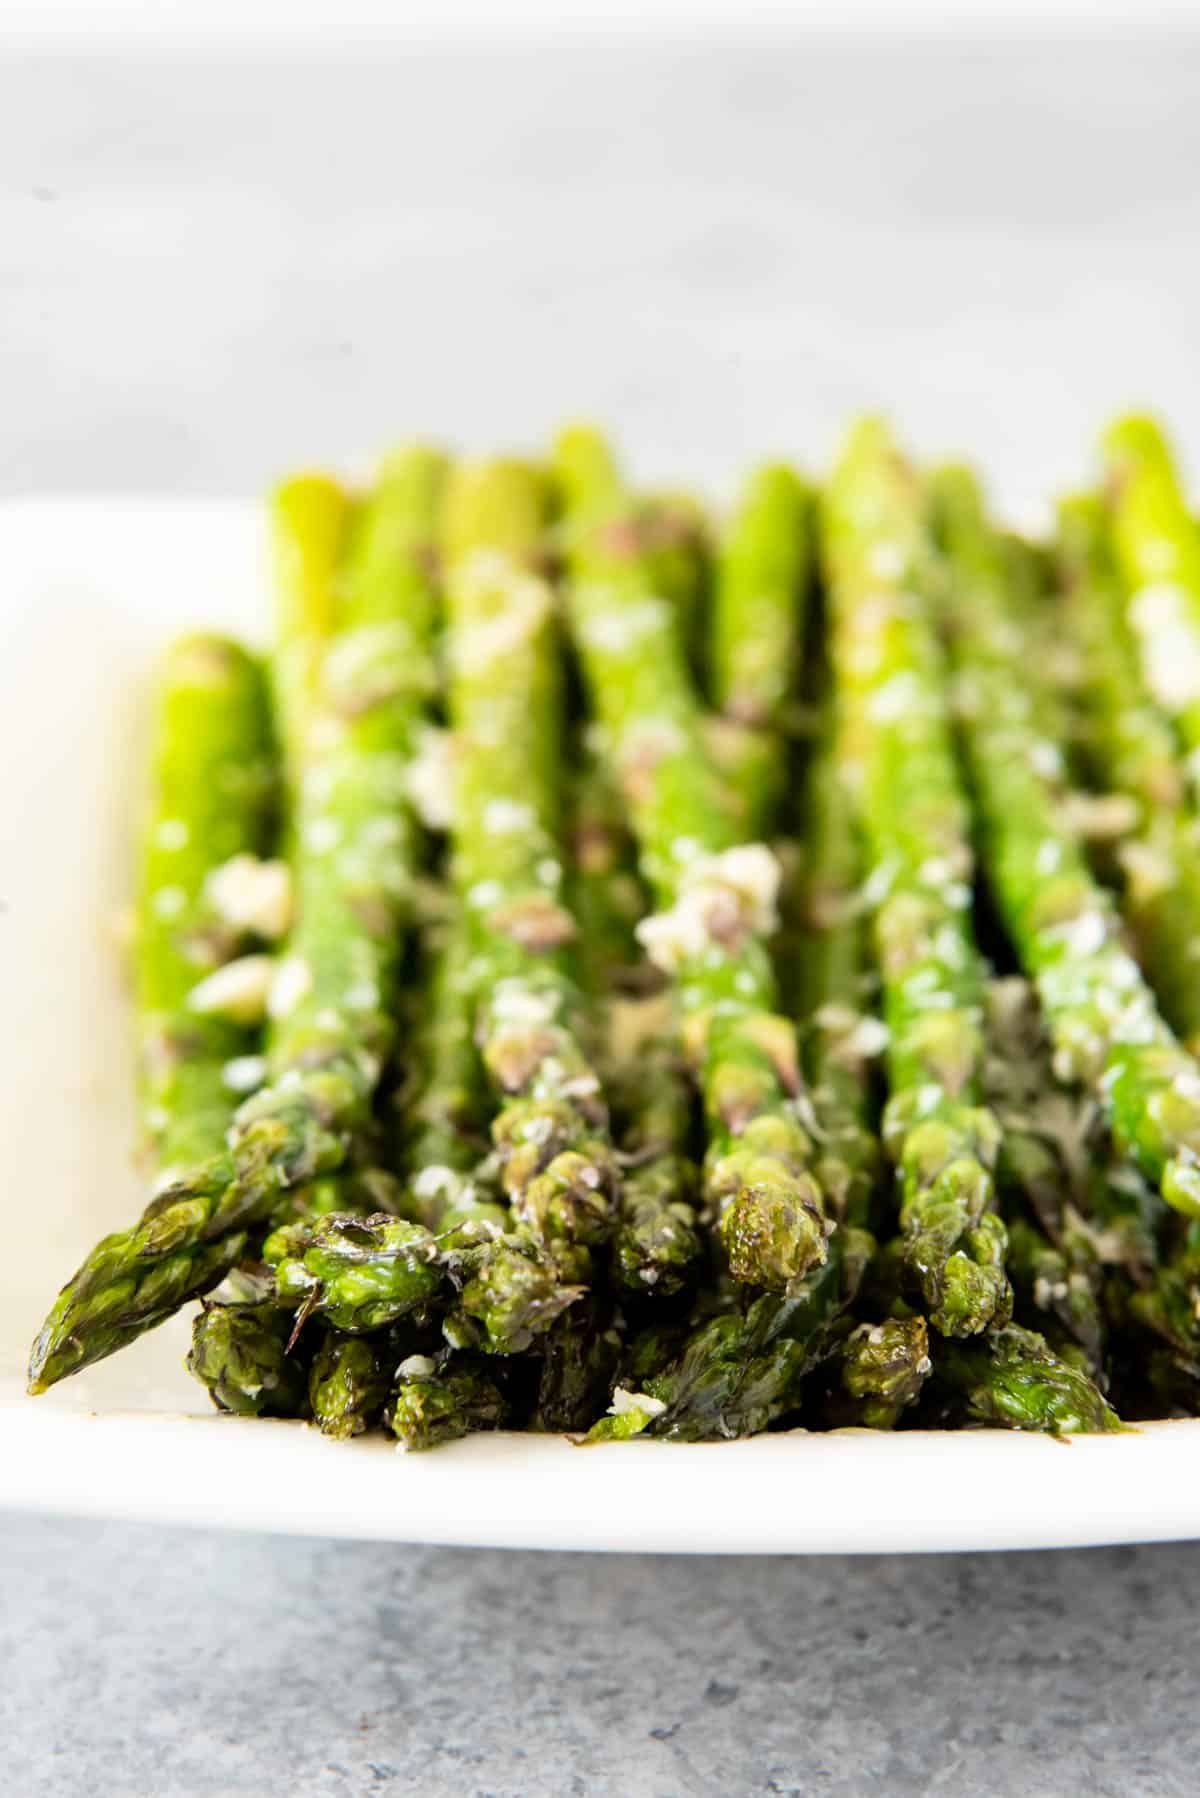 A plate with rows of asparagus topped with cheese.